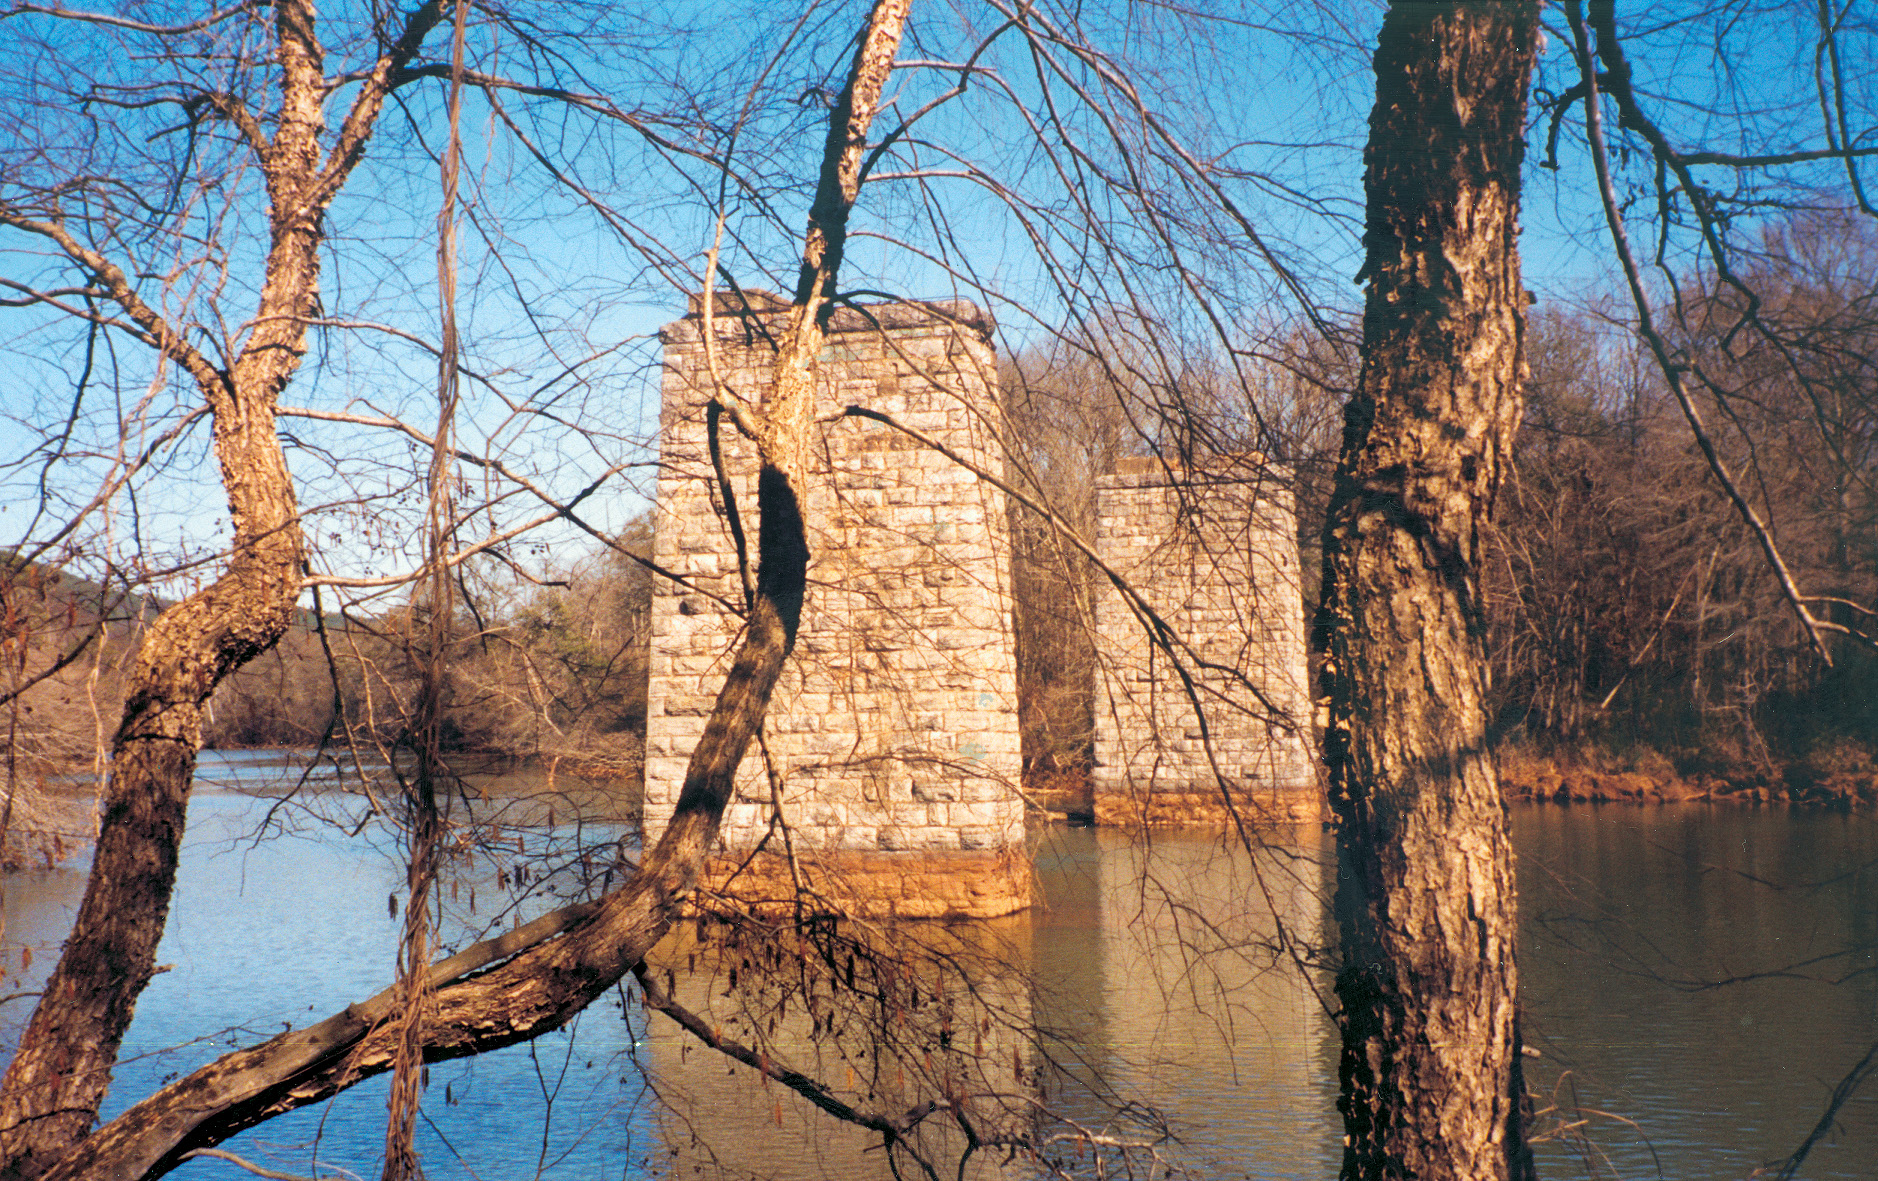 The bridge supports in the top photograph as they are today.